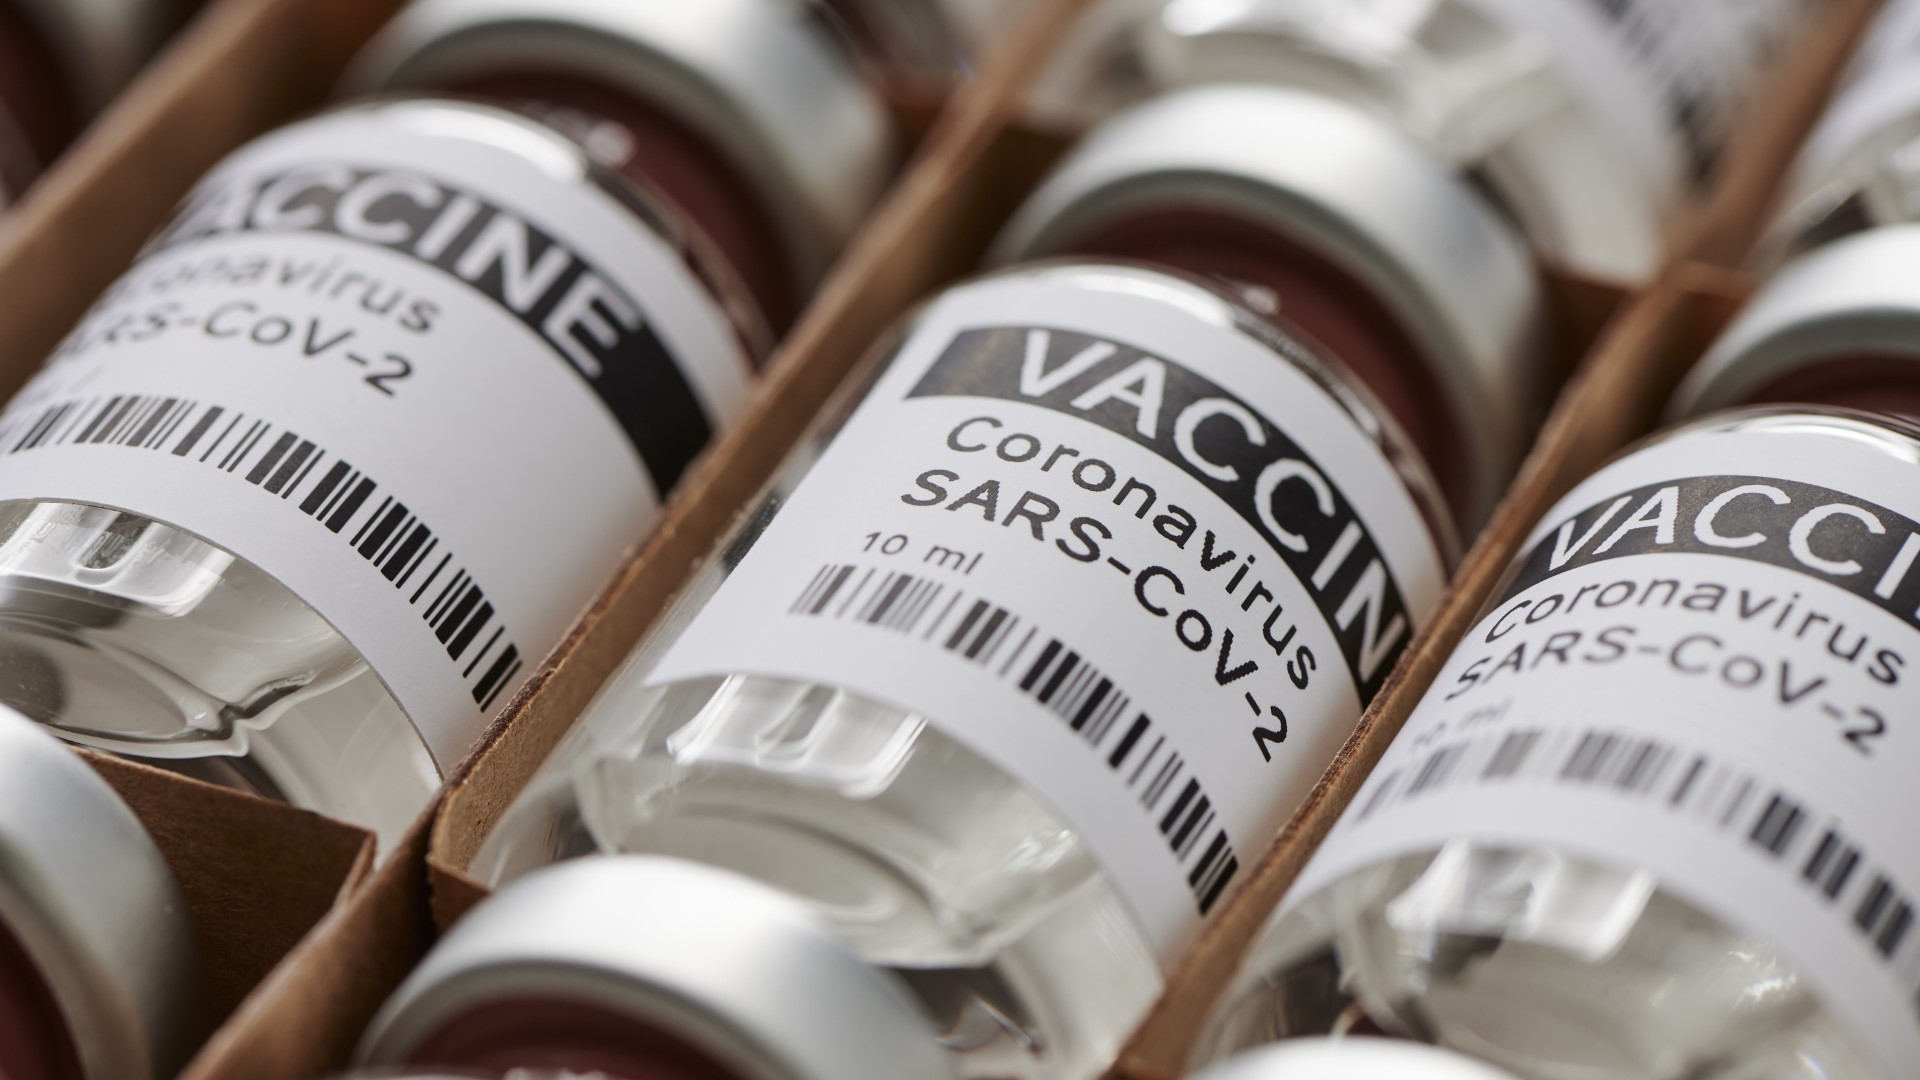 The Maine Departments of Health and Human Services and Education have launched a three-step plan to encourage vaccinations among school community members.